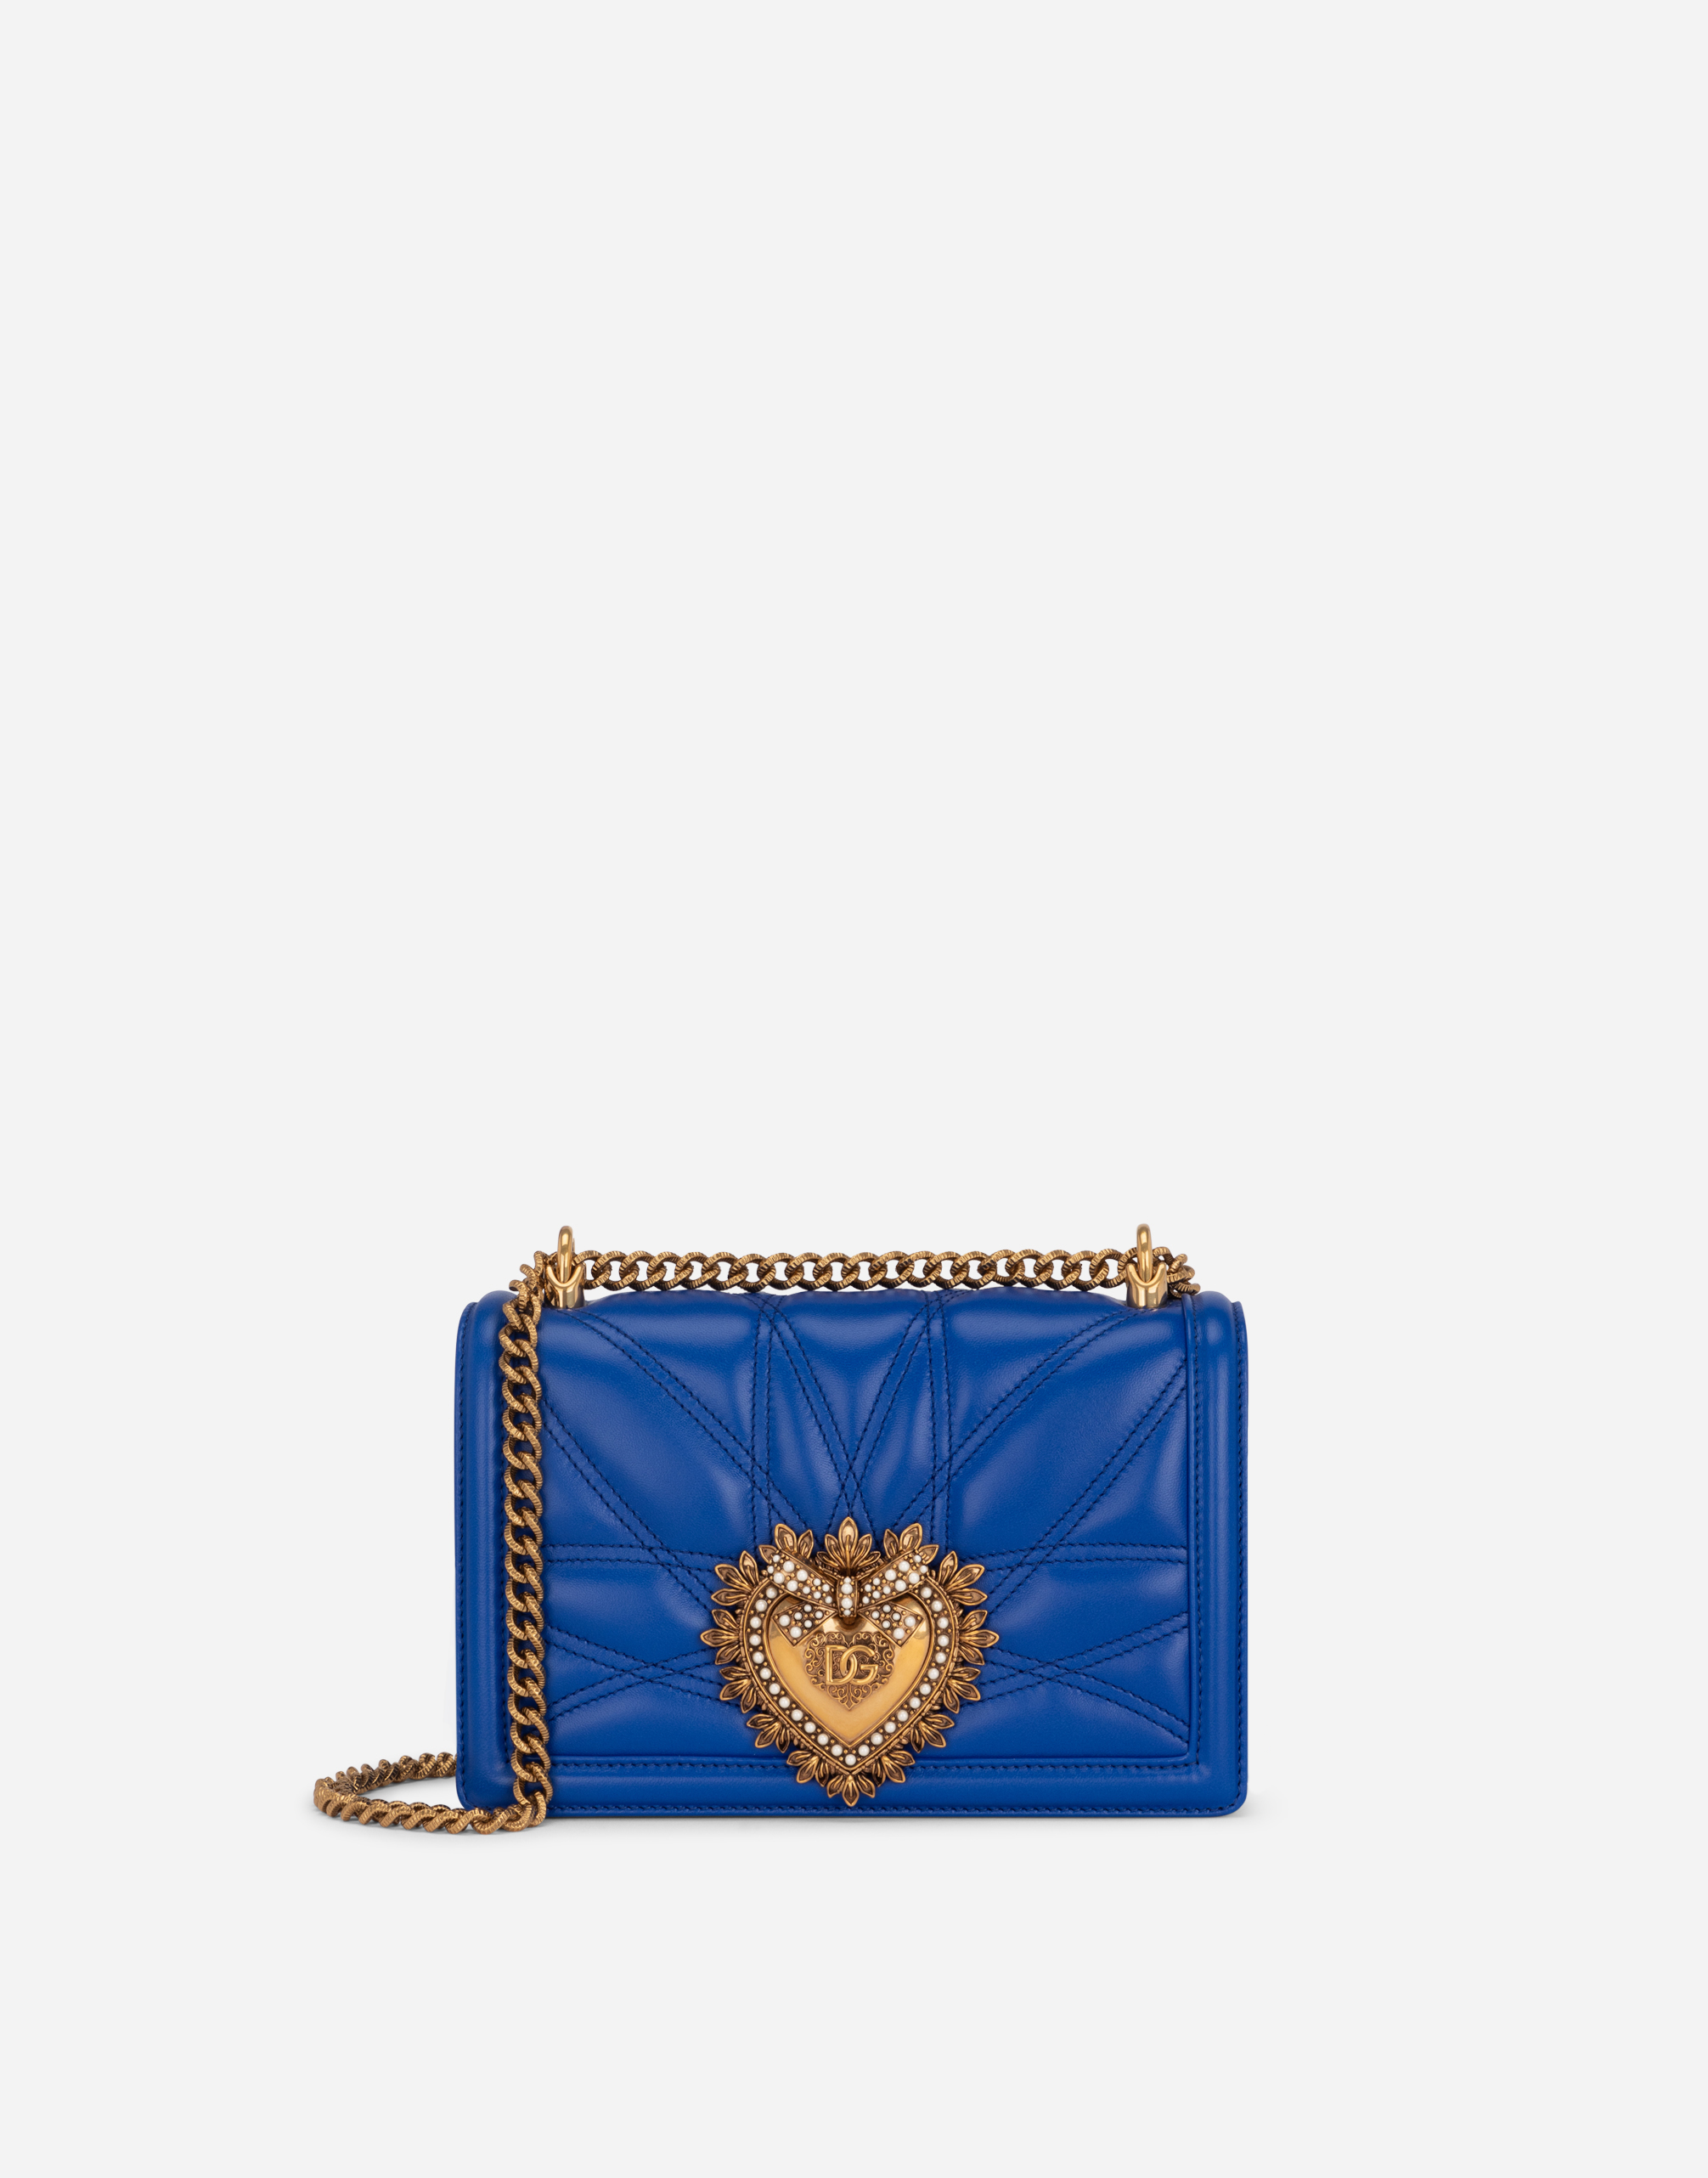 Dolce & Gabbana Medium Devotion Bag In Quilted Nappa Leather In Blue